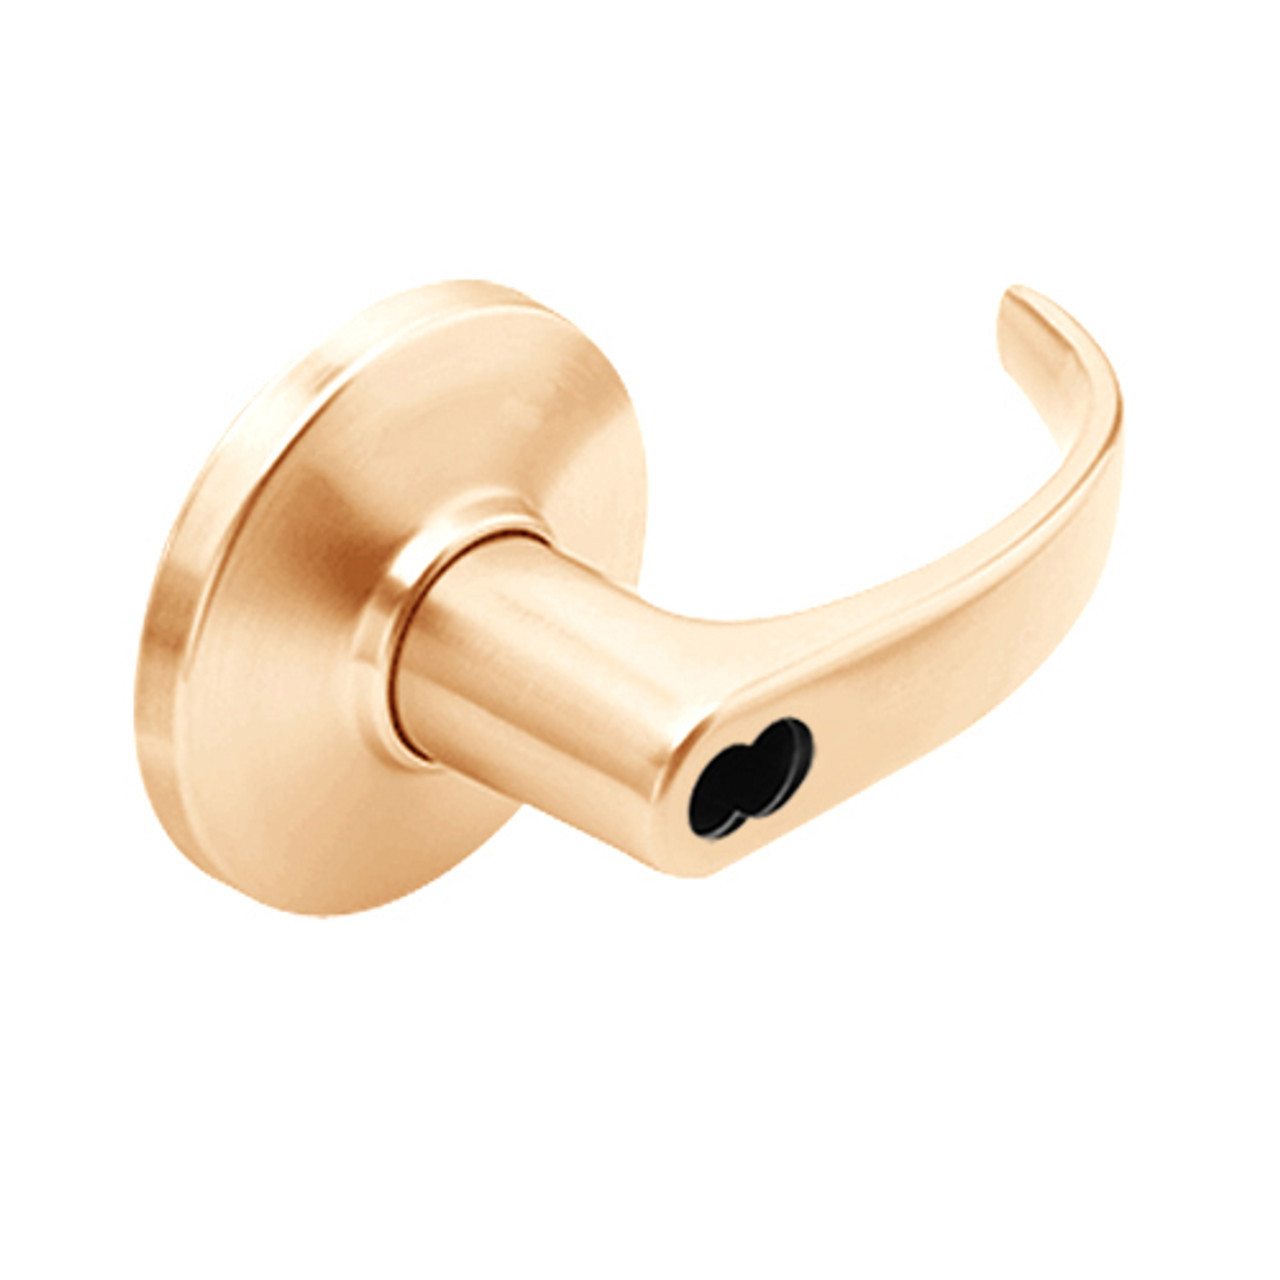 9K37RD14DSTK611LM Best 9K Series Special Function Cylindrical Lever Locks with Curved with Return Lever Design Accept 7 Pin Best Core in Bright Bronze